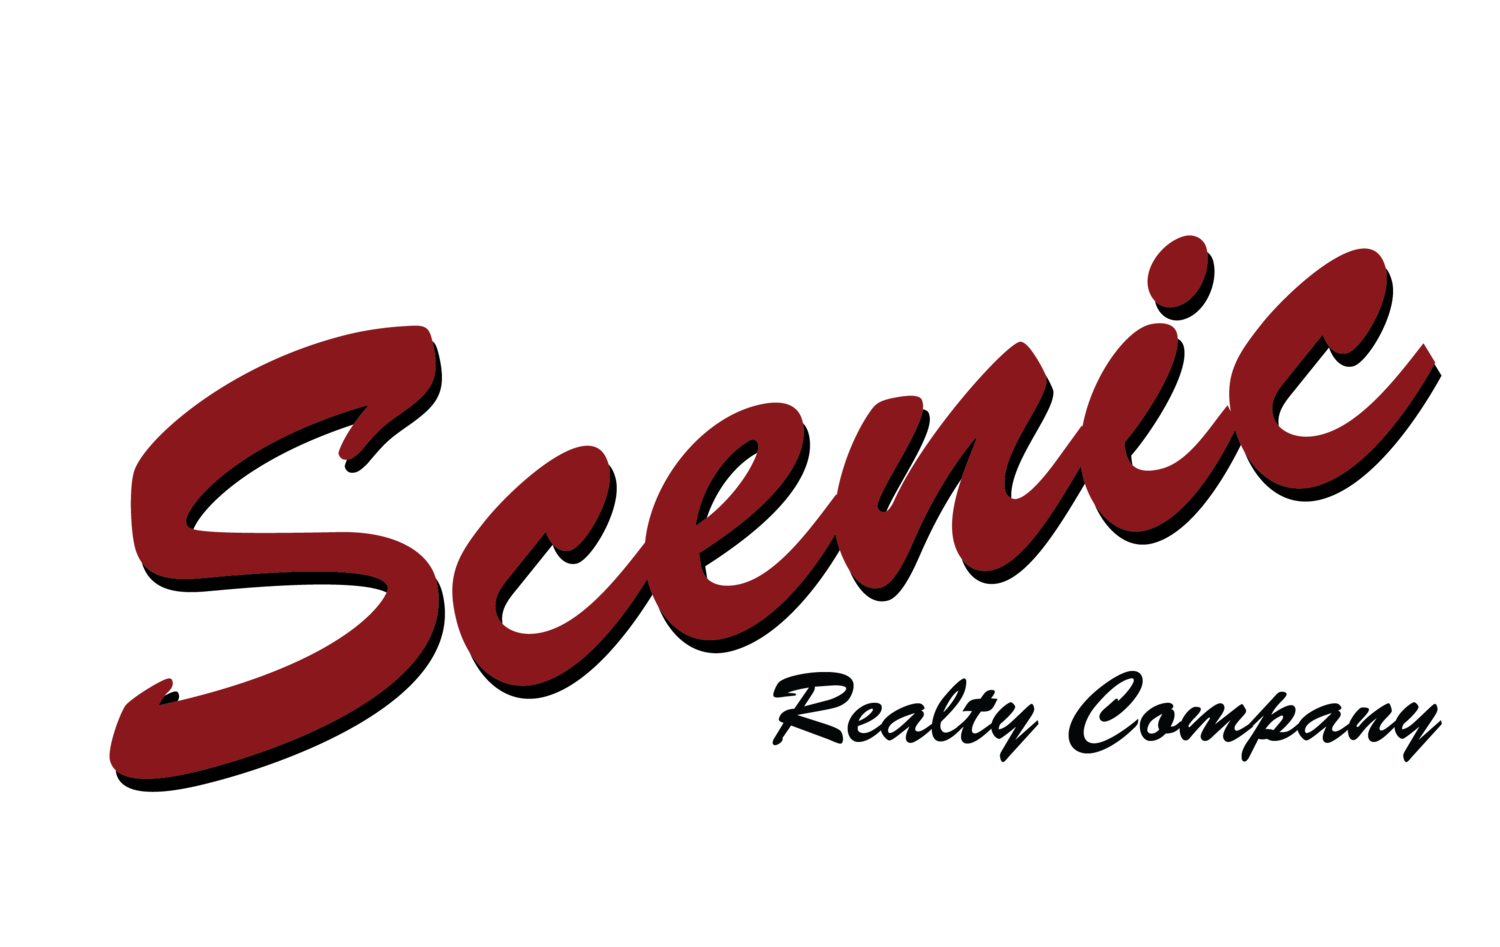 Scenic Realty Co.